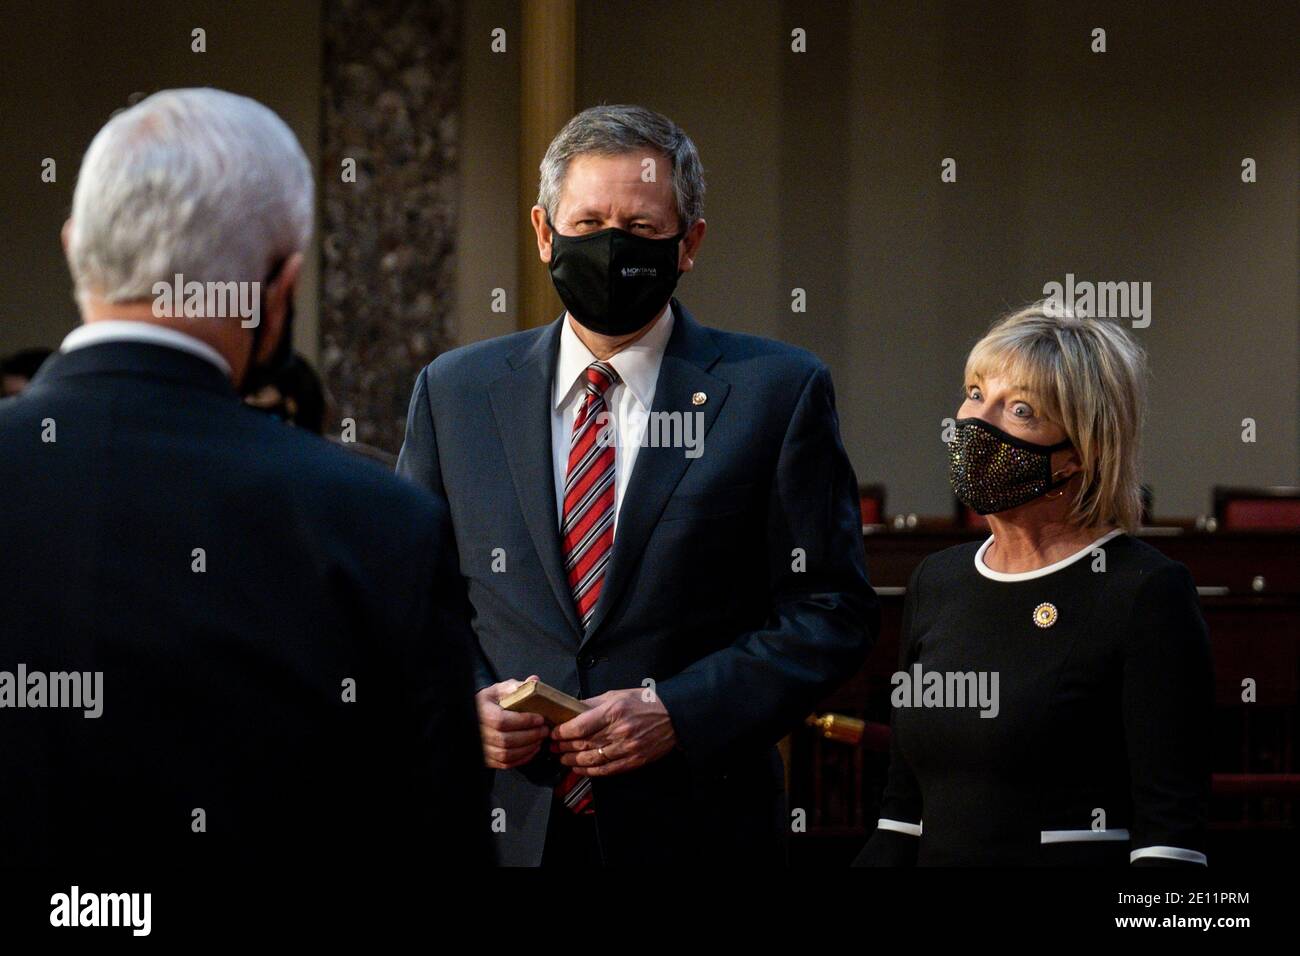 Washington, USA. 03rd Jan, 2021. Vice President Mike Pence speaks with Senator Steve Daines (R-MT) and his wife, Cindy, during a mock swearing-in ceremony in the Old Senate Chamber on Capitol Hill on January 3, 2021 in Washington, DC. (Photo by Pete Marovich/Pool/Sipa USA) Credit: Sipa USA/Alamy Live News Stock Photo